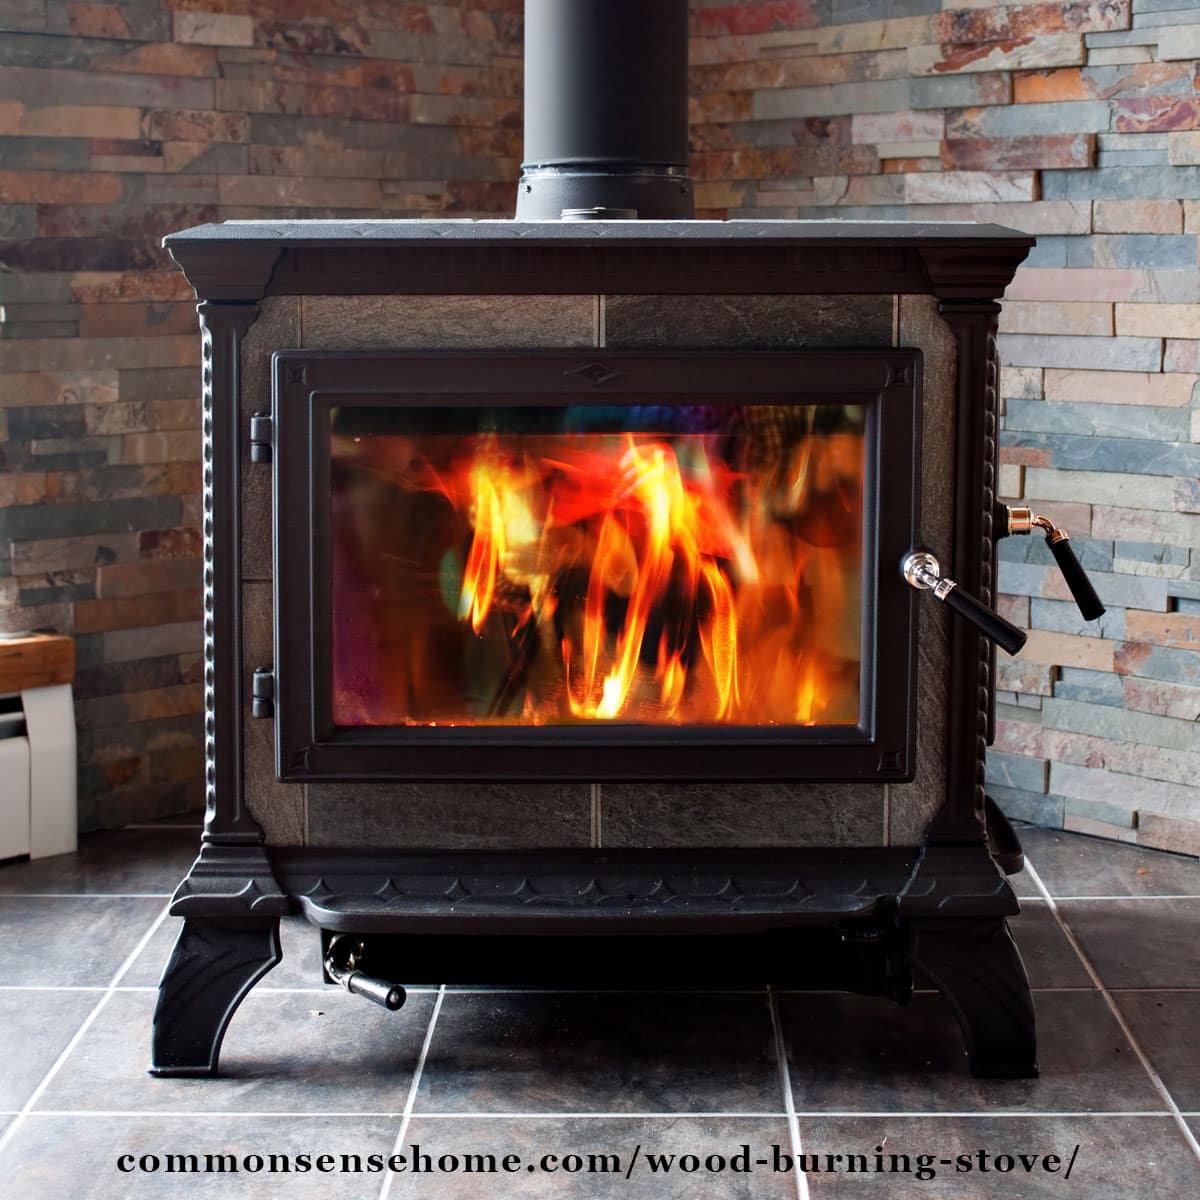 5 Things You Need to Know Before You Buy a Wood Burning Stove